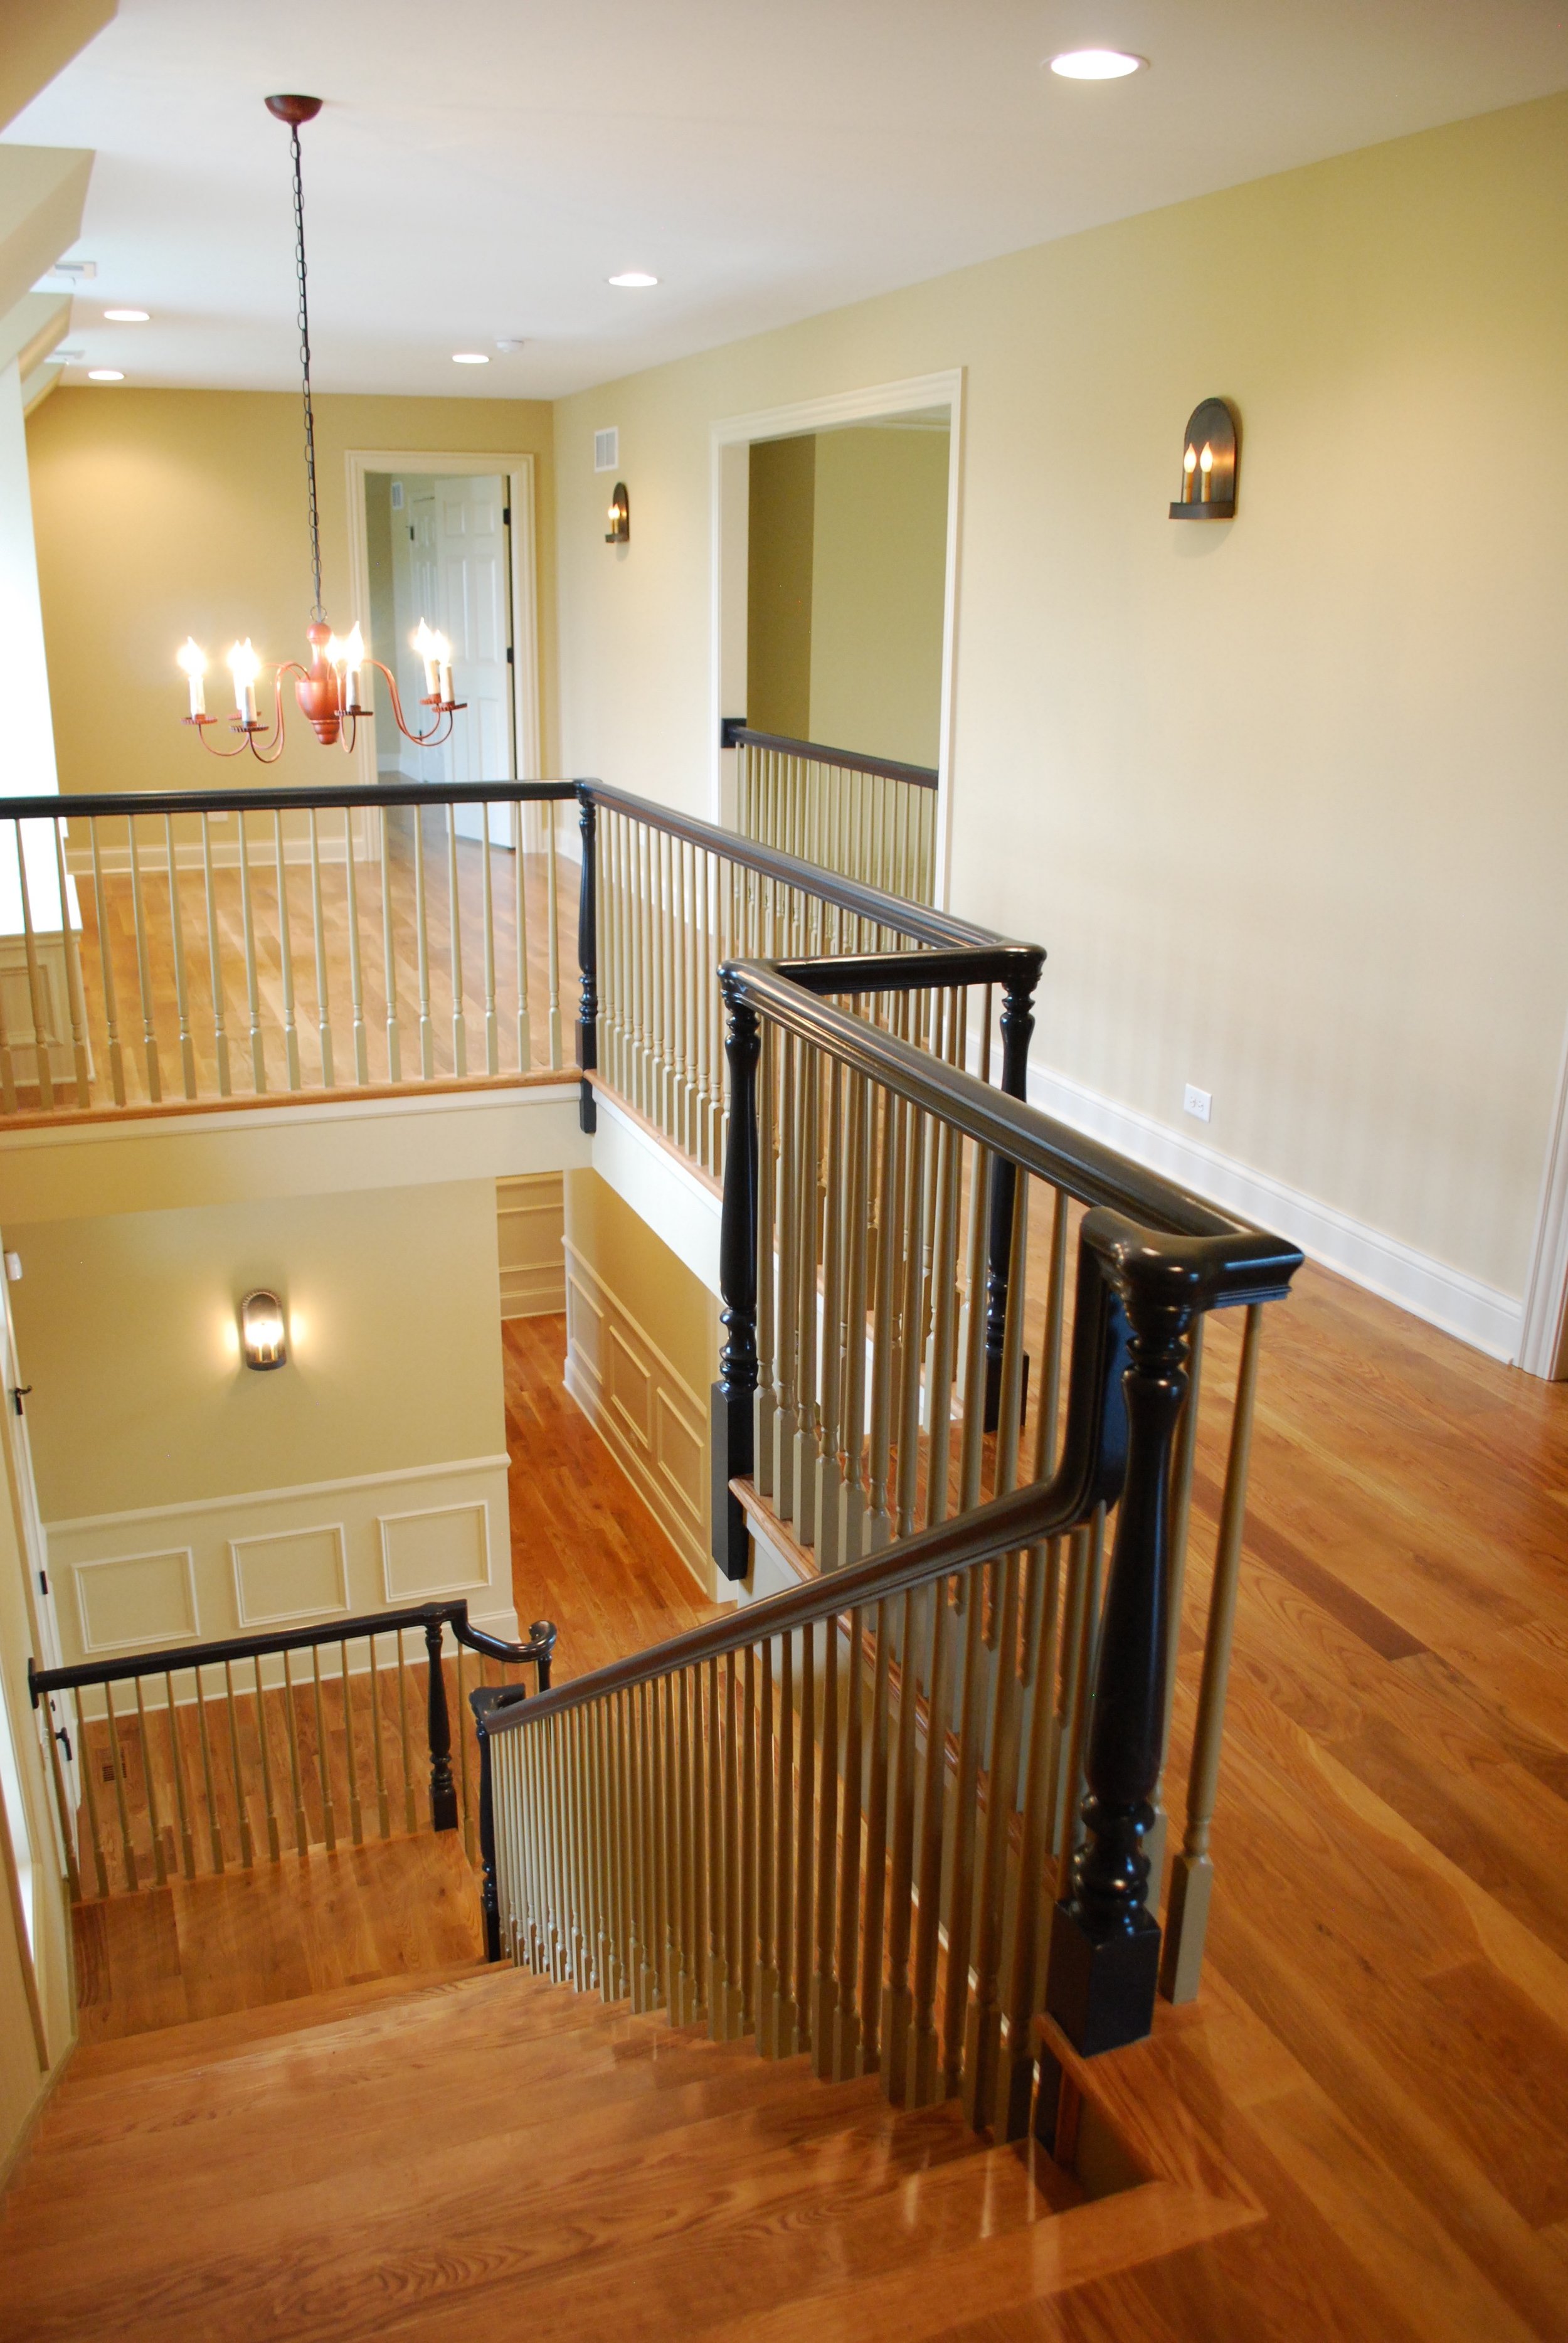 Historical Replication Staircase in this New Custom Home